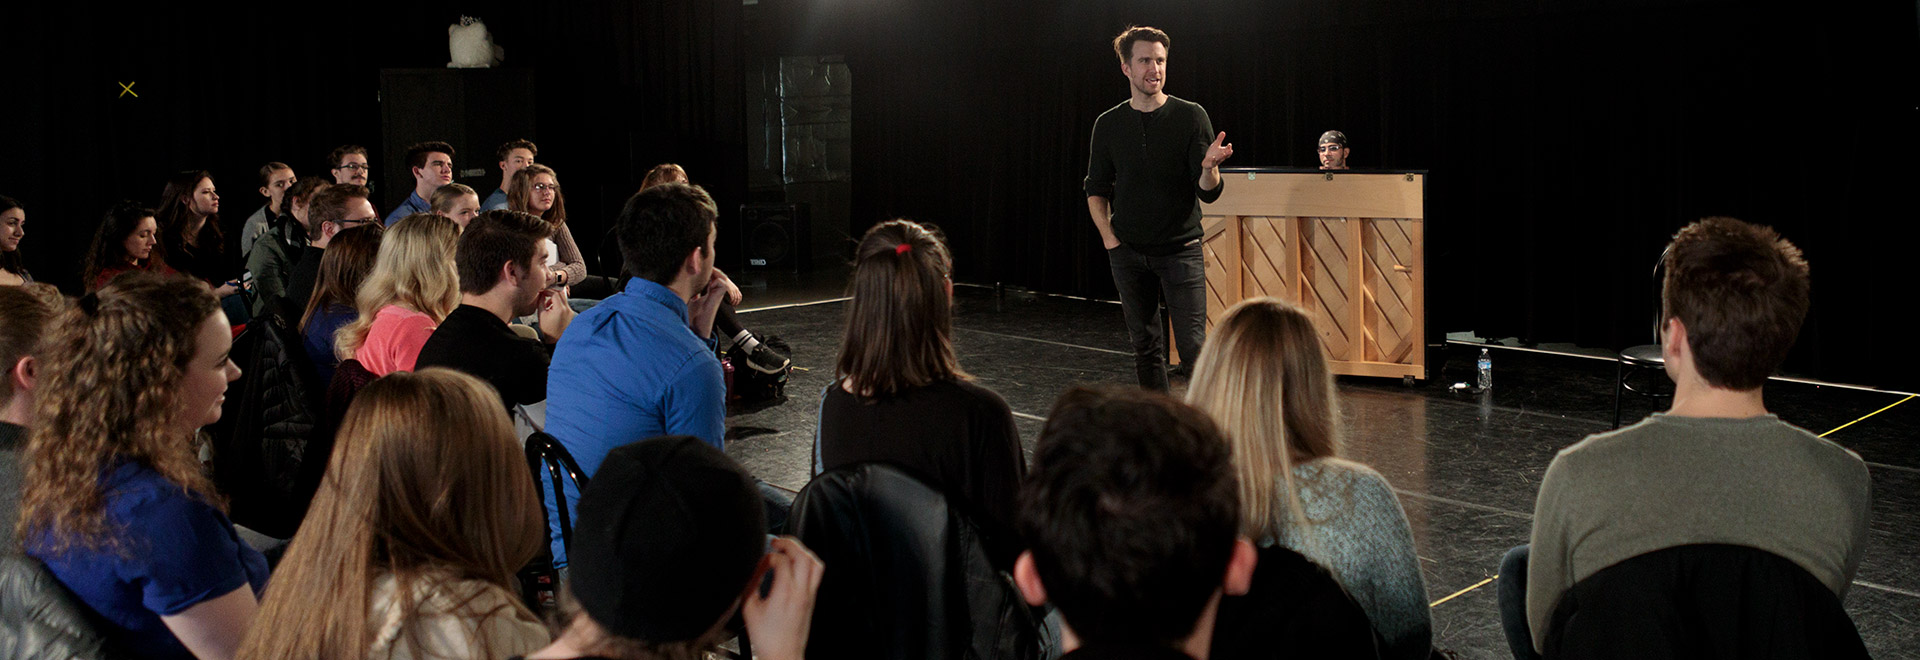 Tony Award winning actor Gavin Creel works with Ohio Northern University Department of Theatre students during a master class.